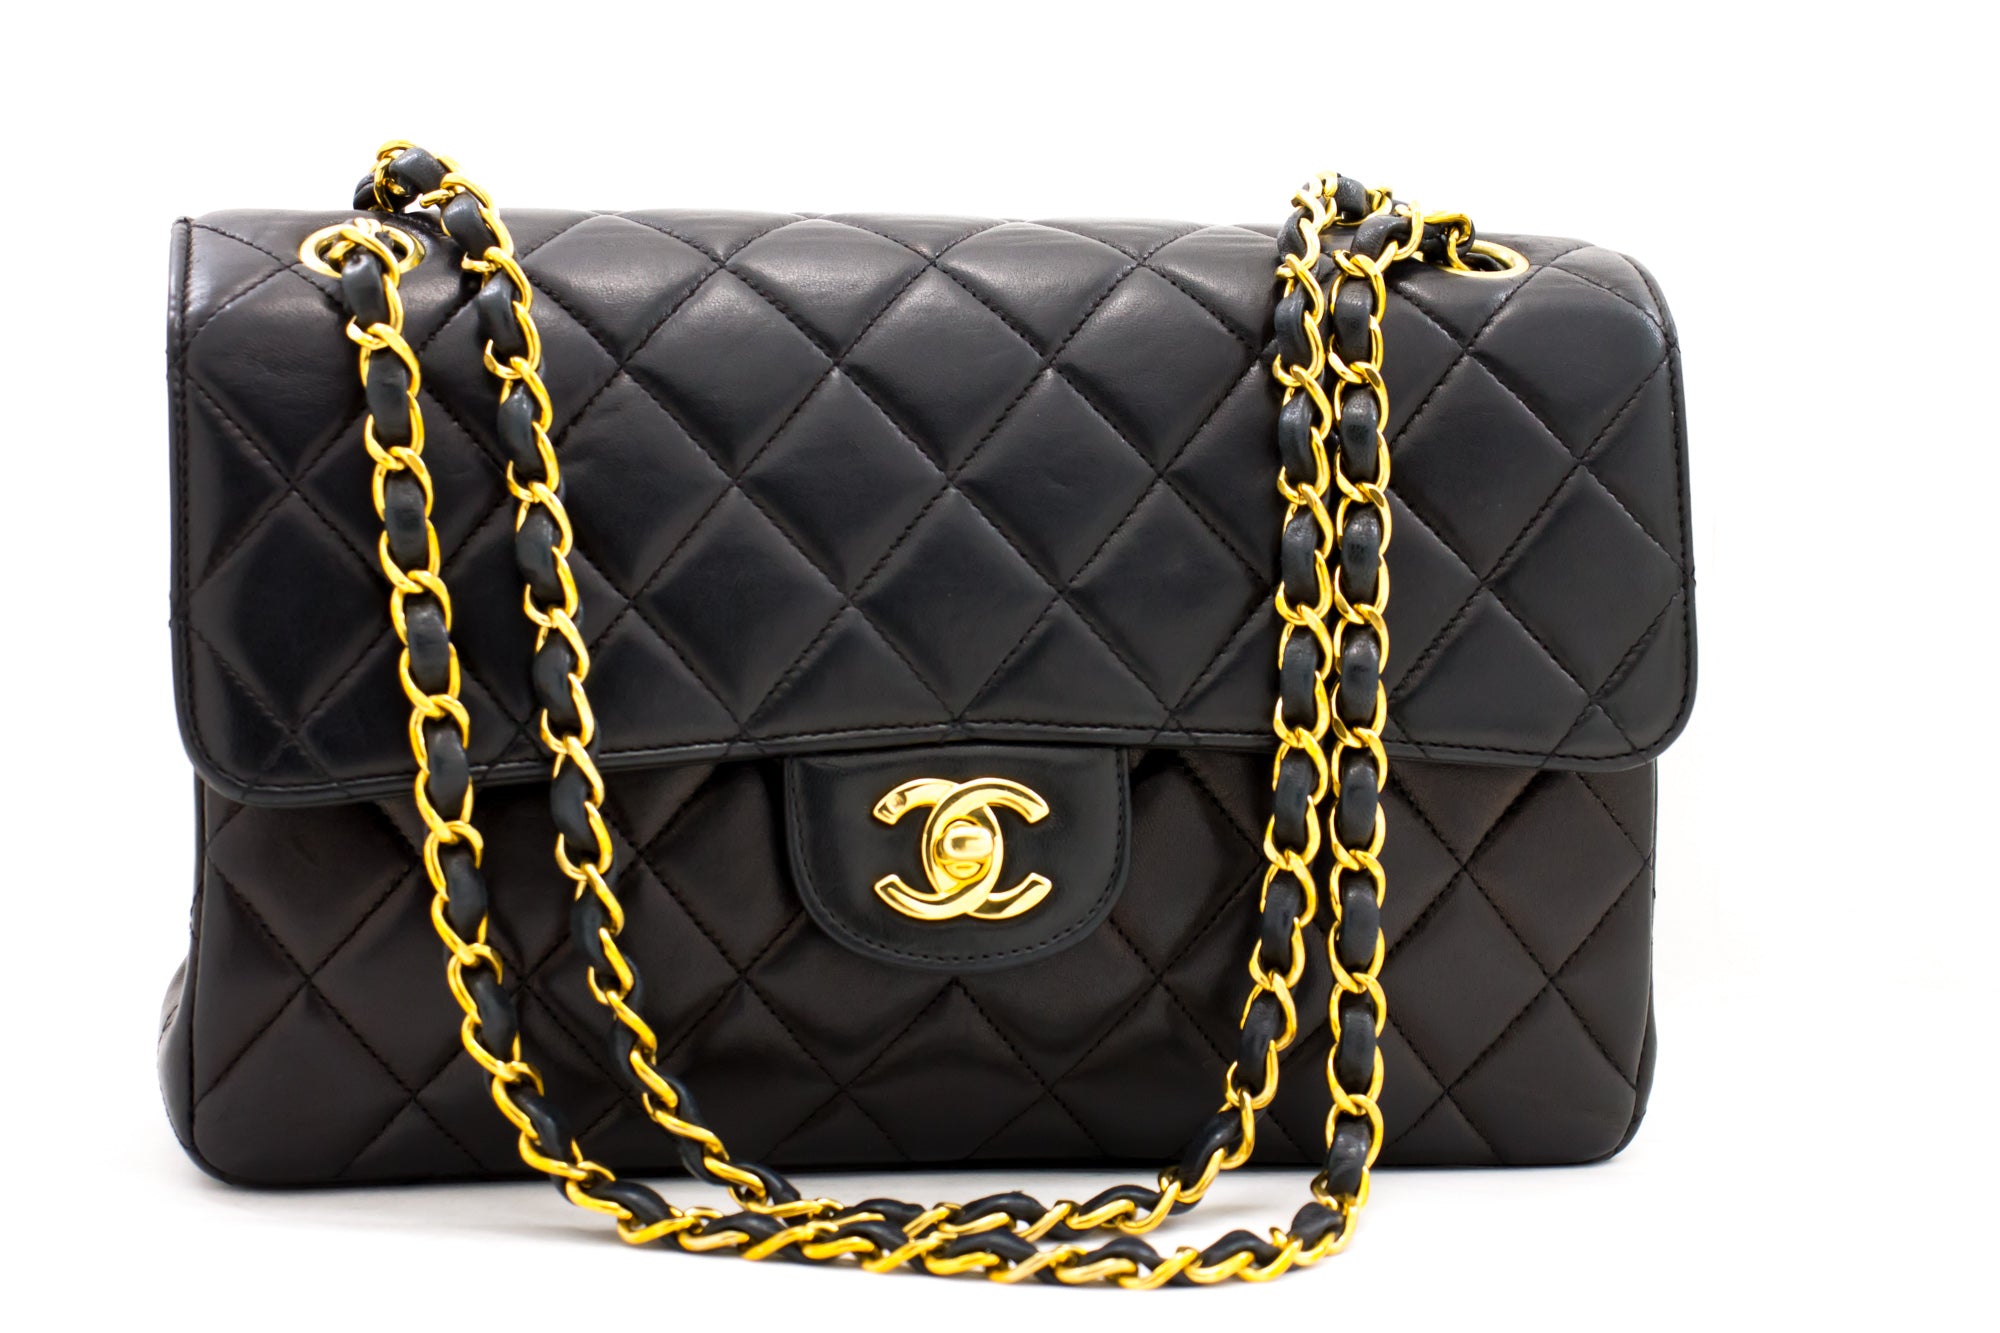 CHANEL Tote Gold Bags & Handbags for Women